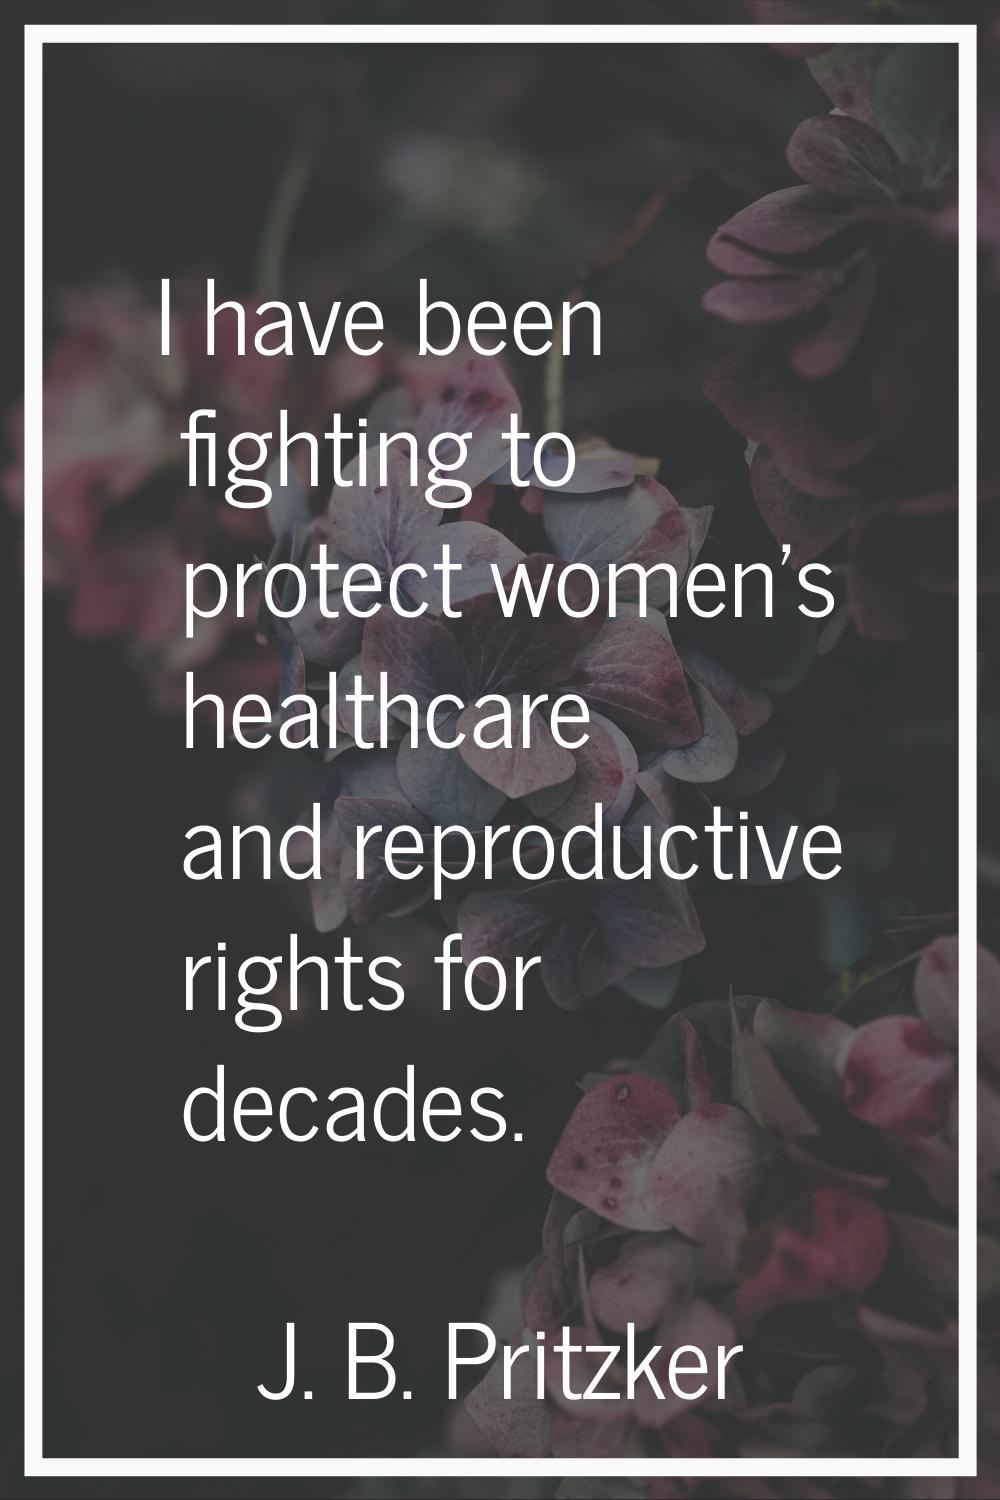 I have been fighting to protect women's healthcare and reproductive rights for decades.